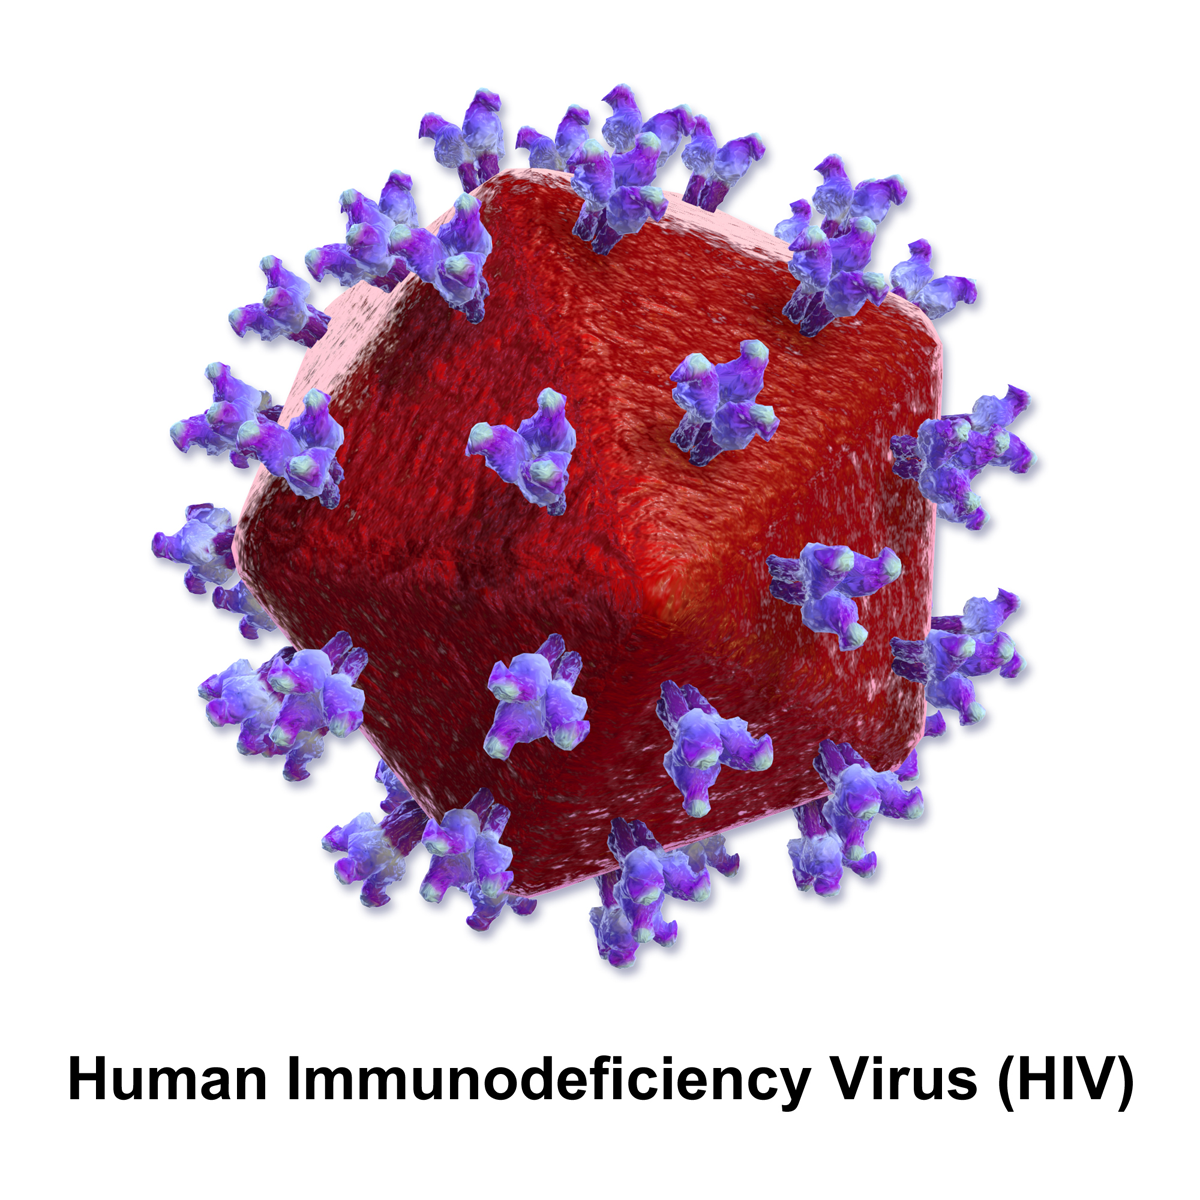 HIV-targeting antibodies offer an alternative approach to current HIV treatment, which has toxic side effects